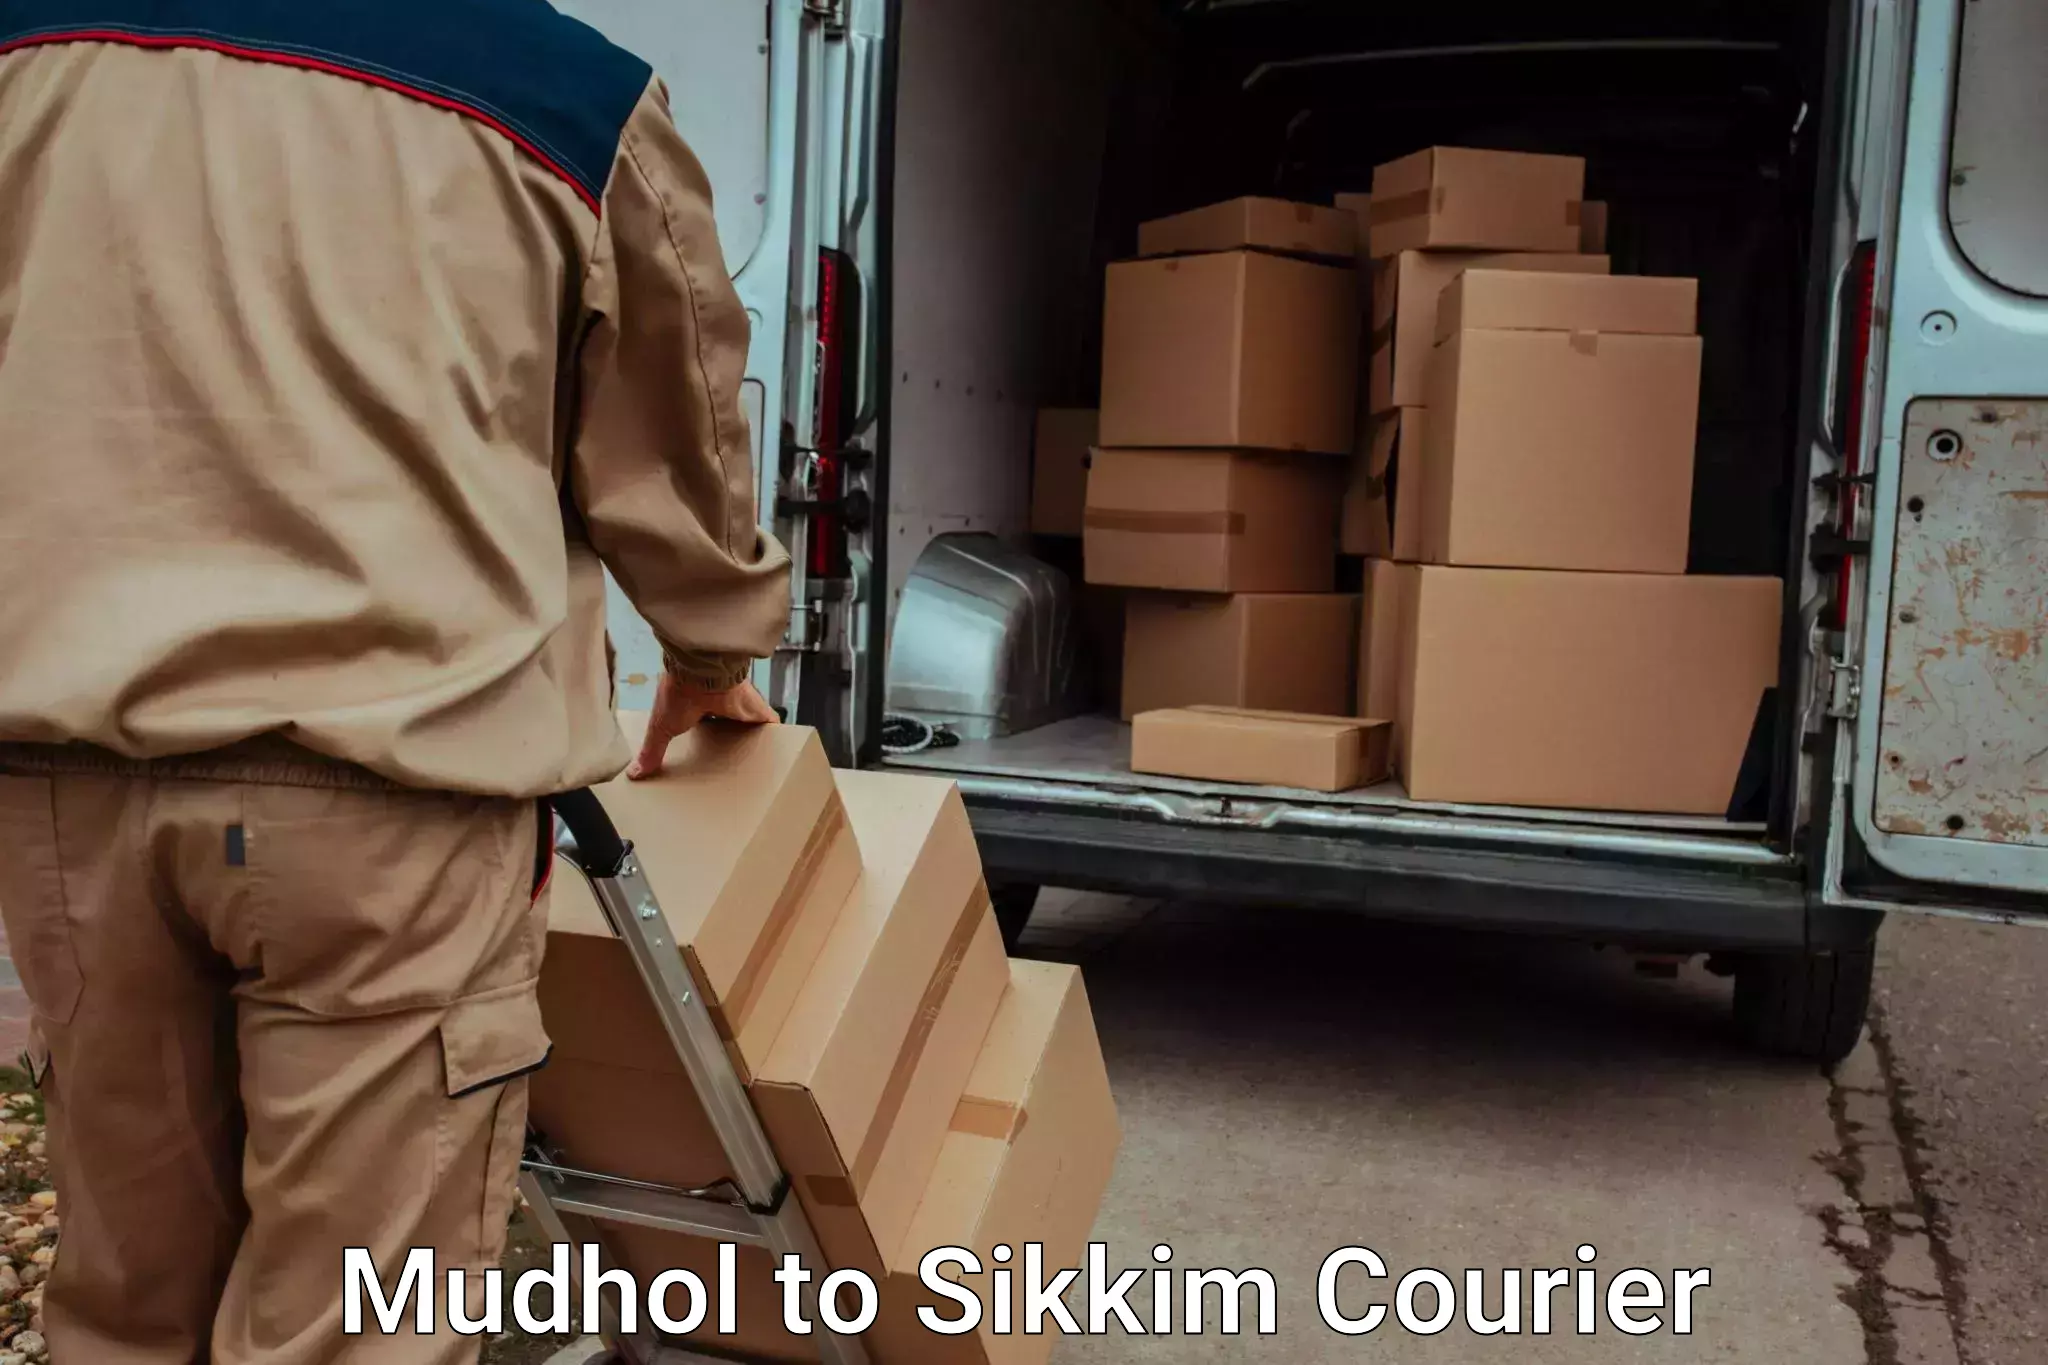 Trusted moving company Mudhol to Pelling